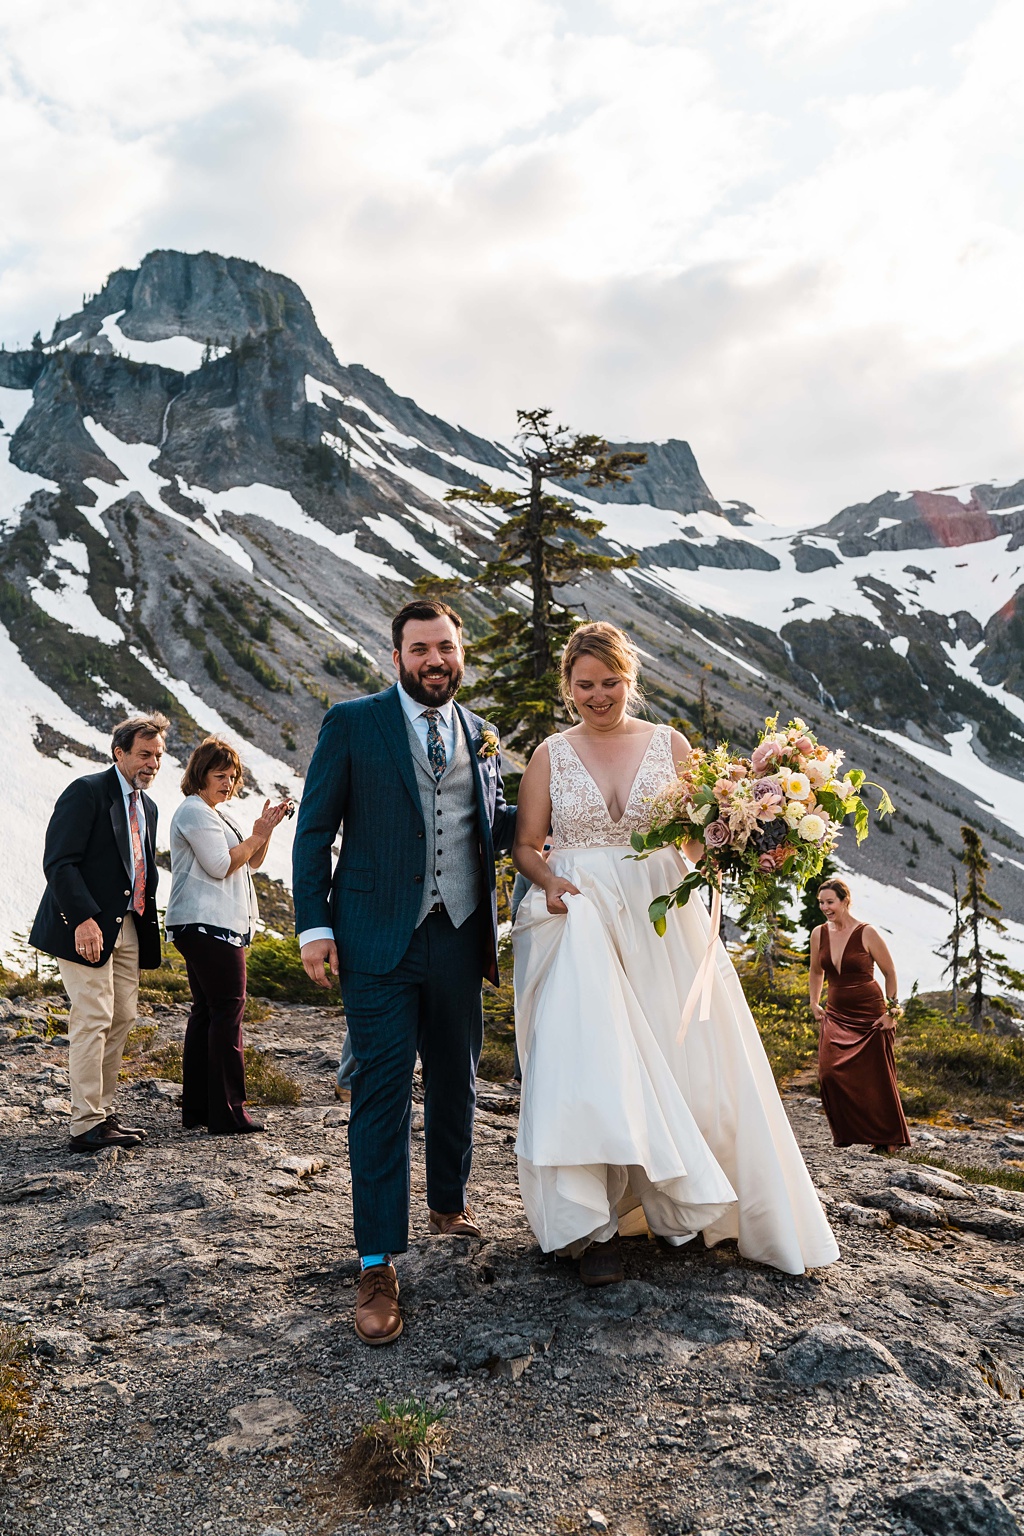 The couple exits their mountaintop ceremony for that just married look!